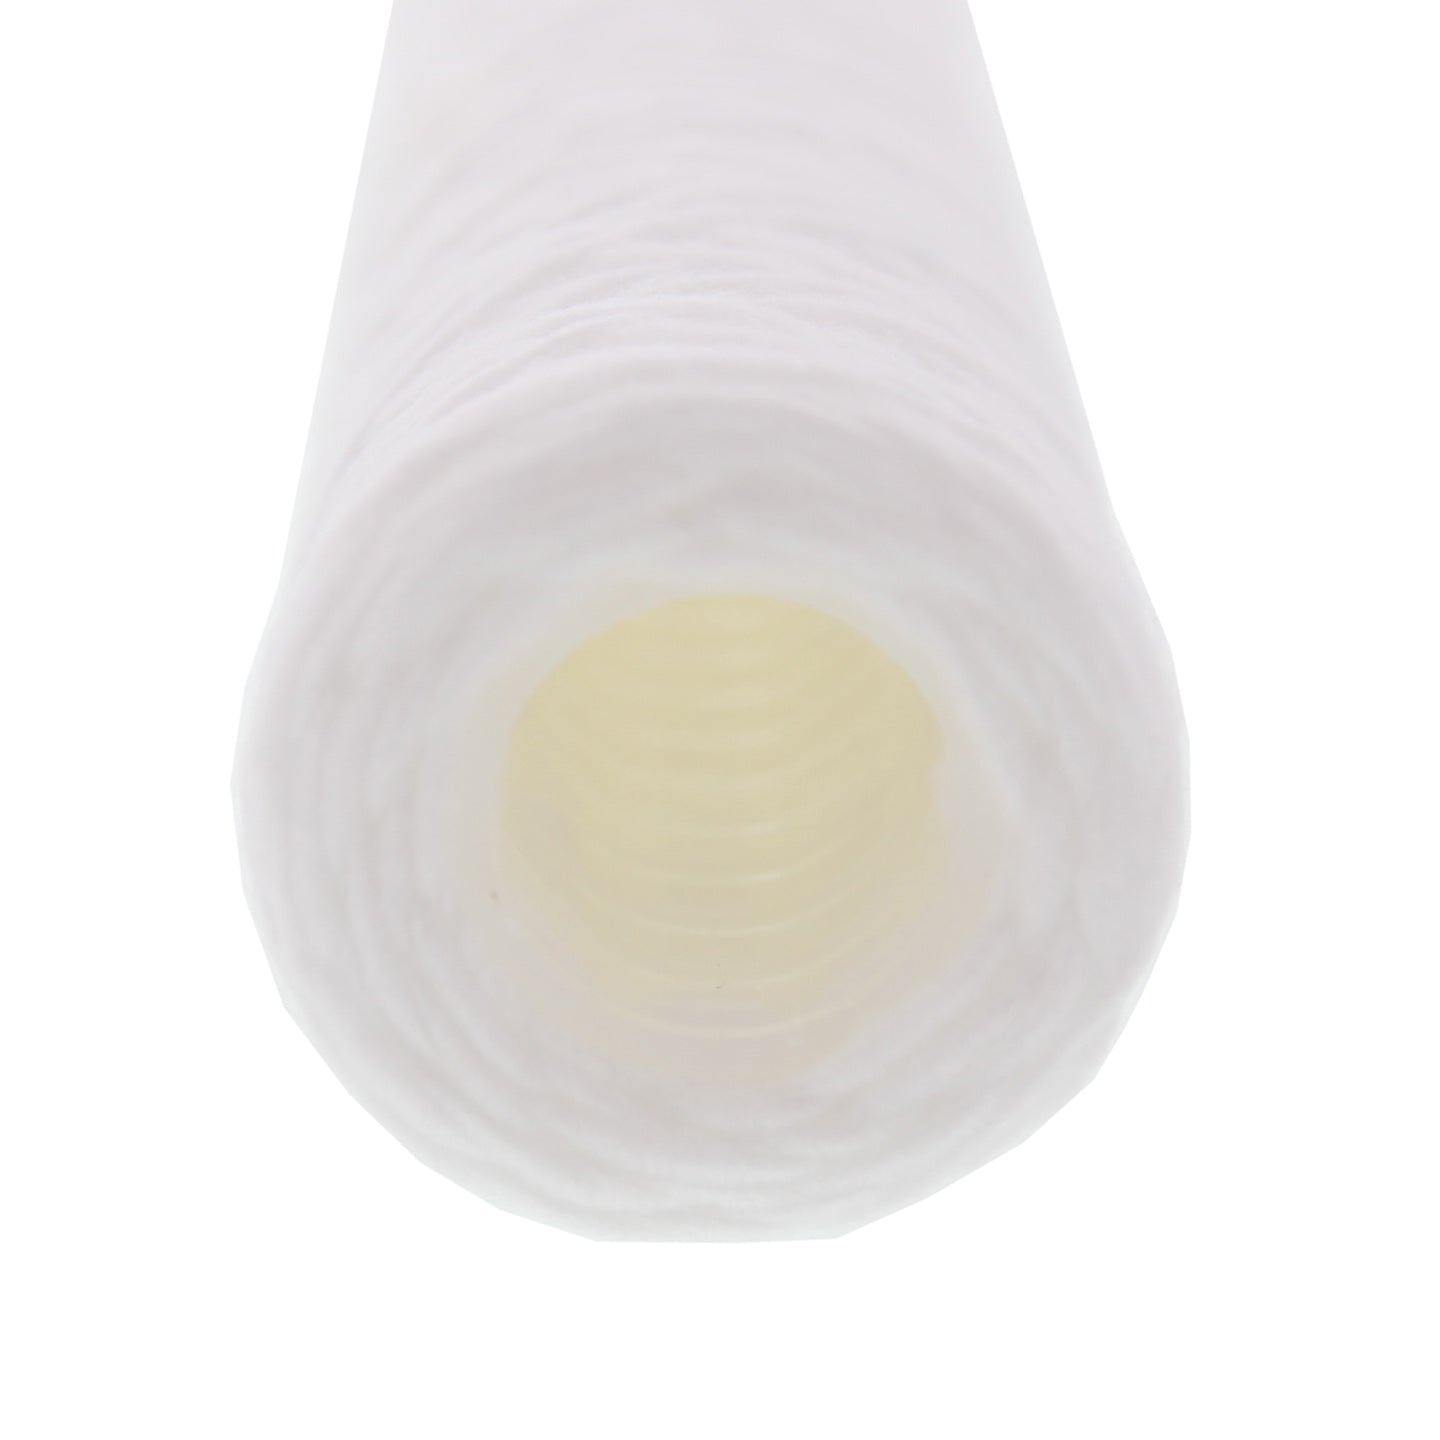 Pentek WP5 String-Wound Water Filters (9-7/8-inch x 2-1/4-inch) (Top View)